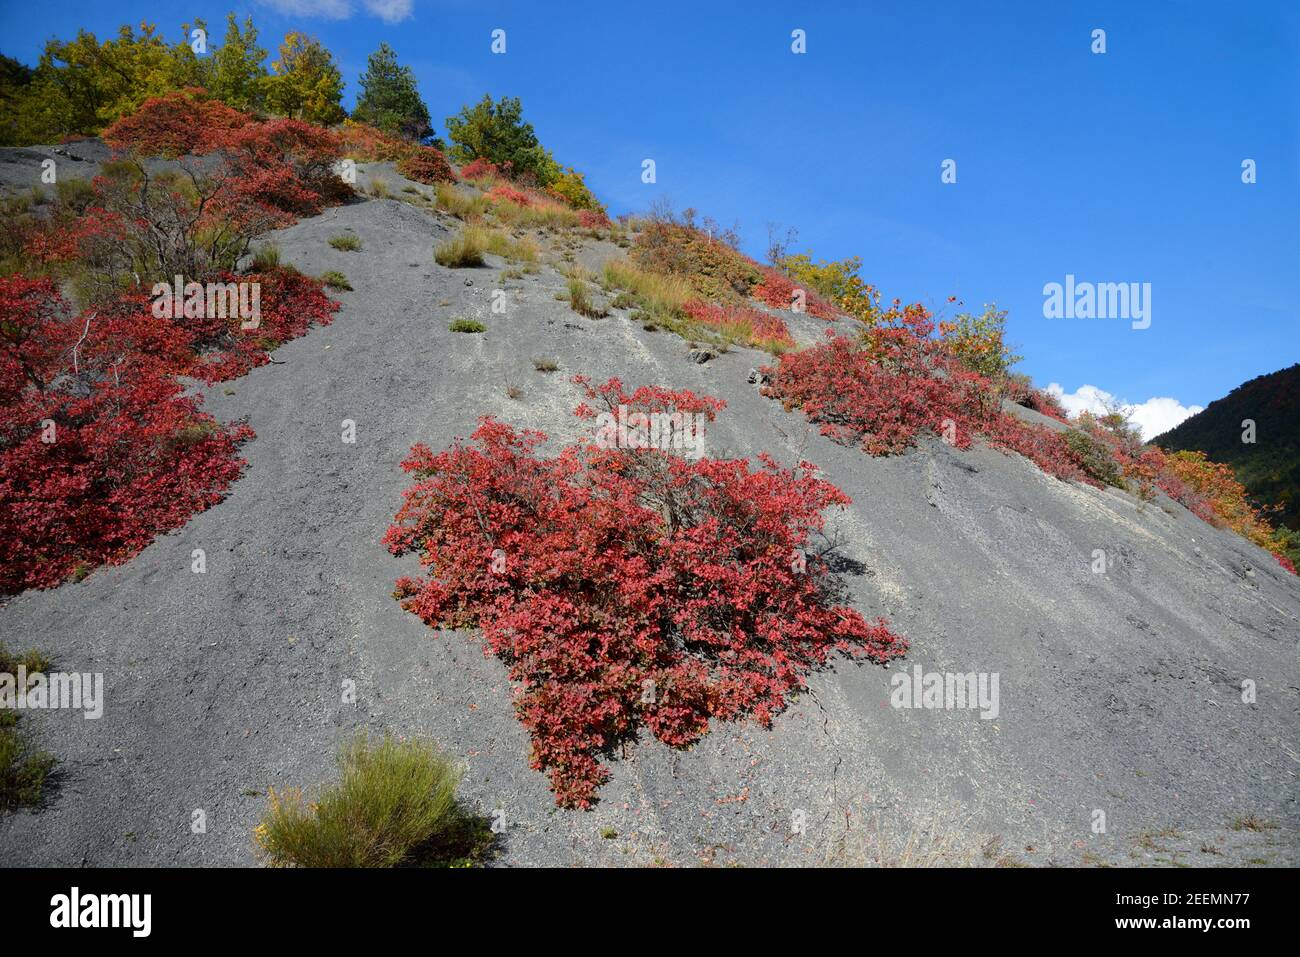 Red Autumn Colours or Fall Colors of Smoke Tree, Cotinus coggygria, Growing on Black Marl Formations known as Robines Alpes-de-Haute-Provence France Stock Photo